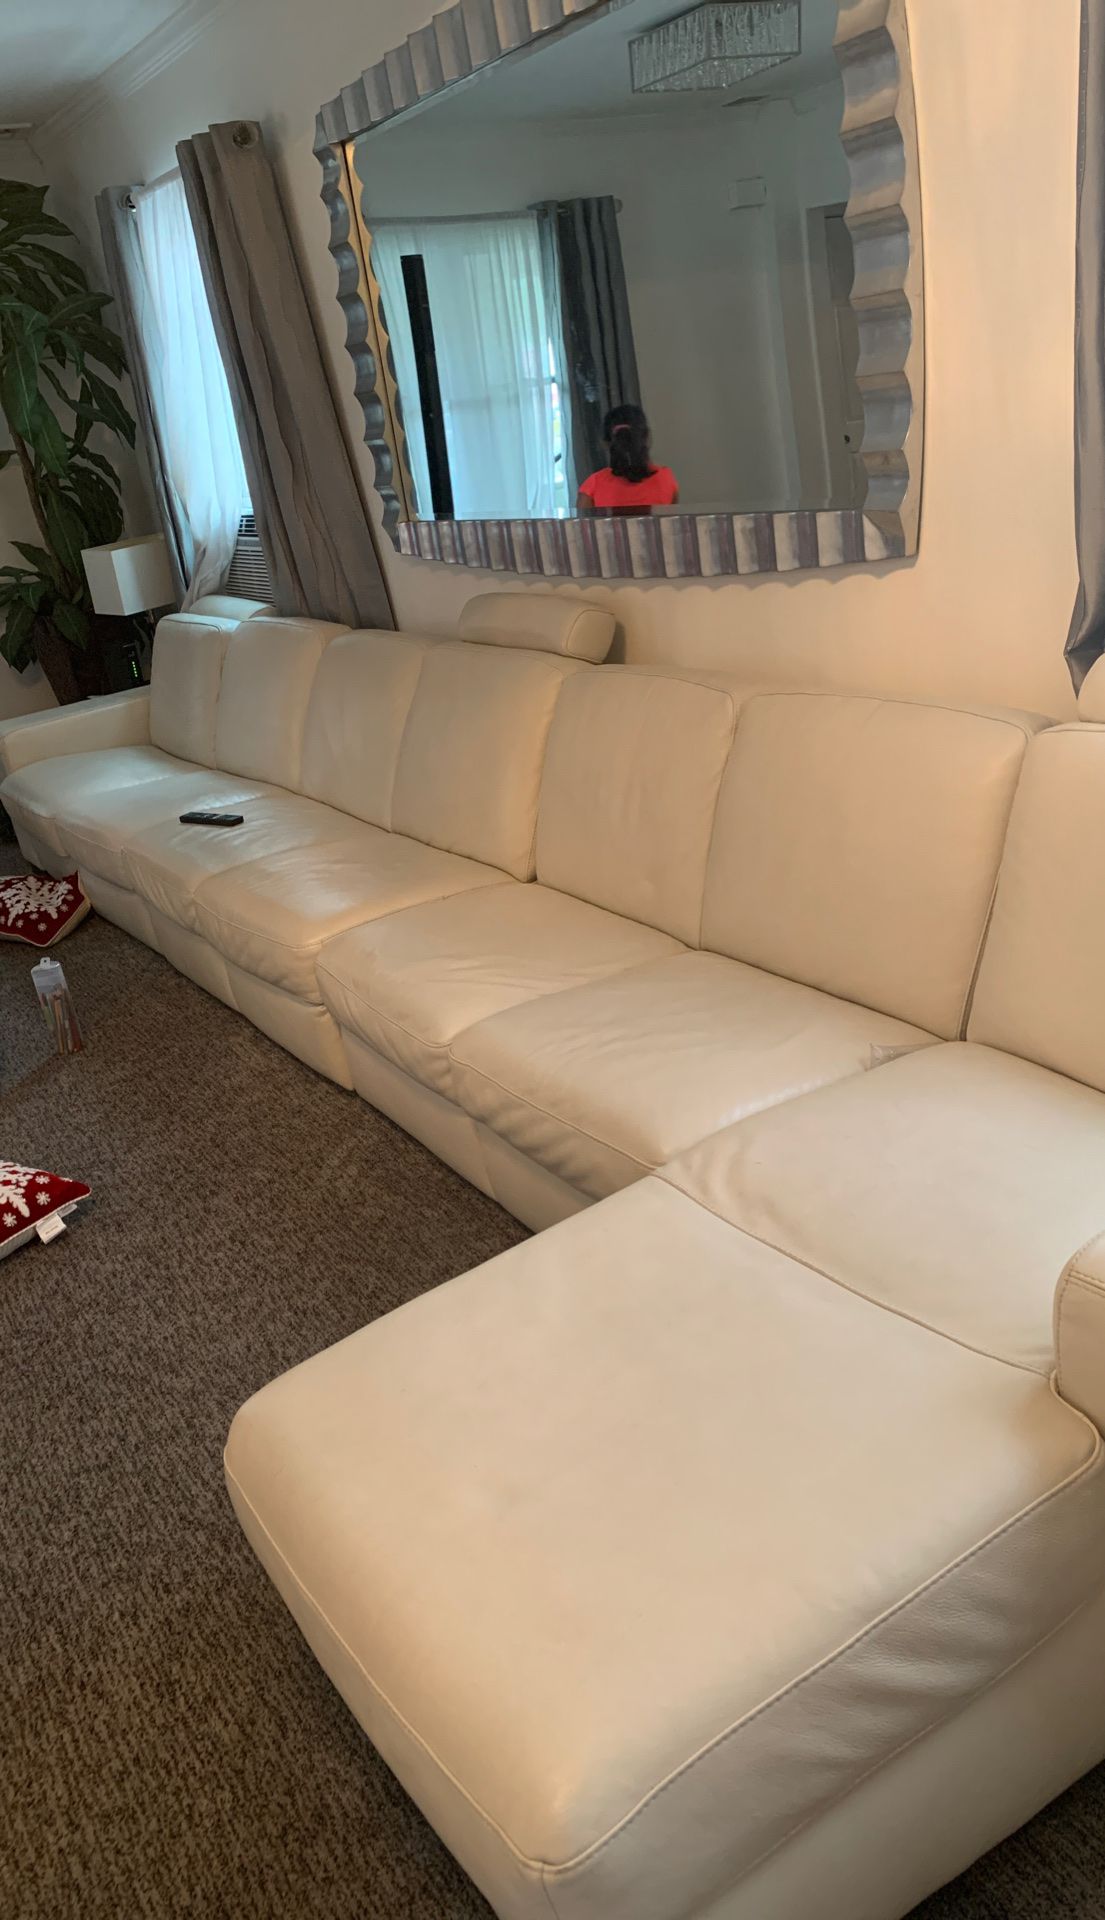 White leather couch one recliner off-white very good condition originally $10,000